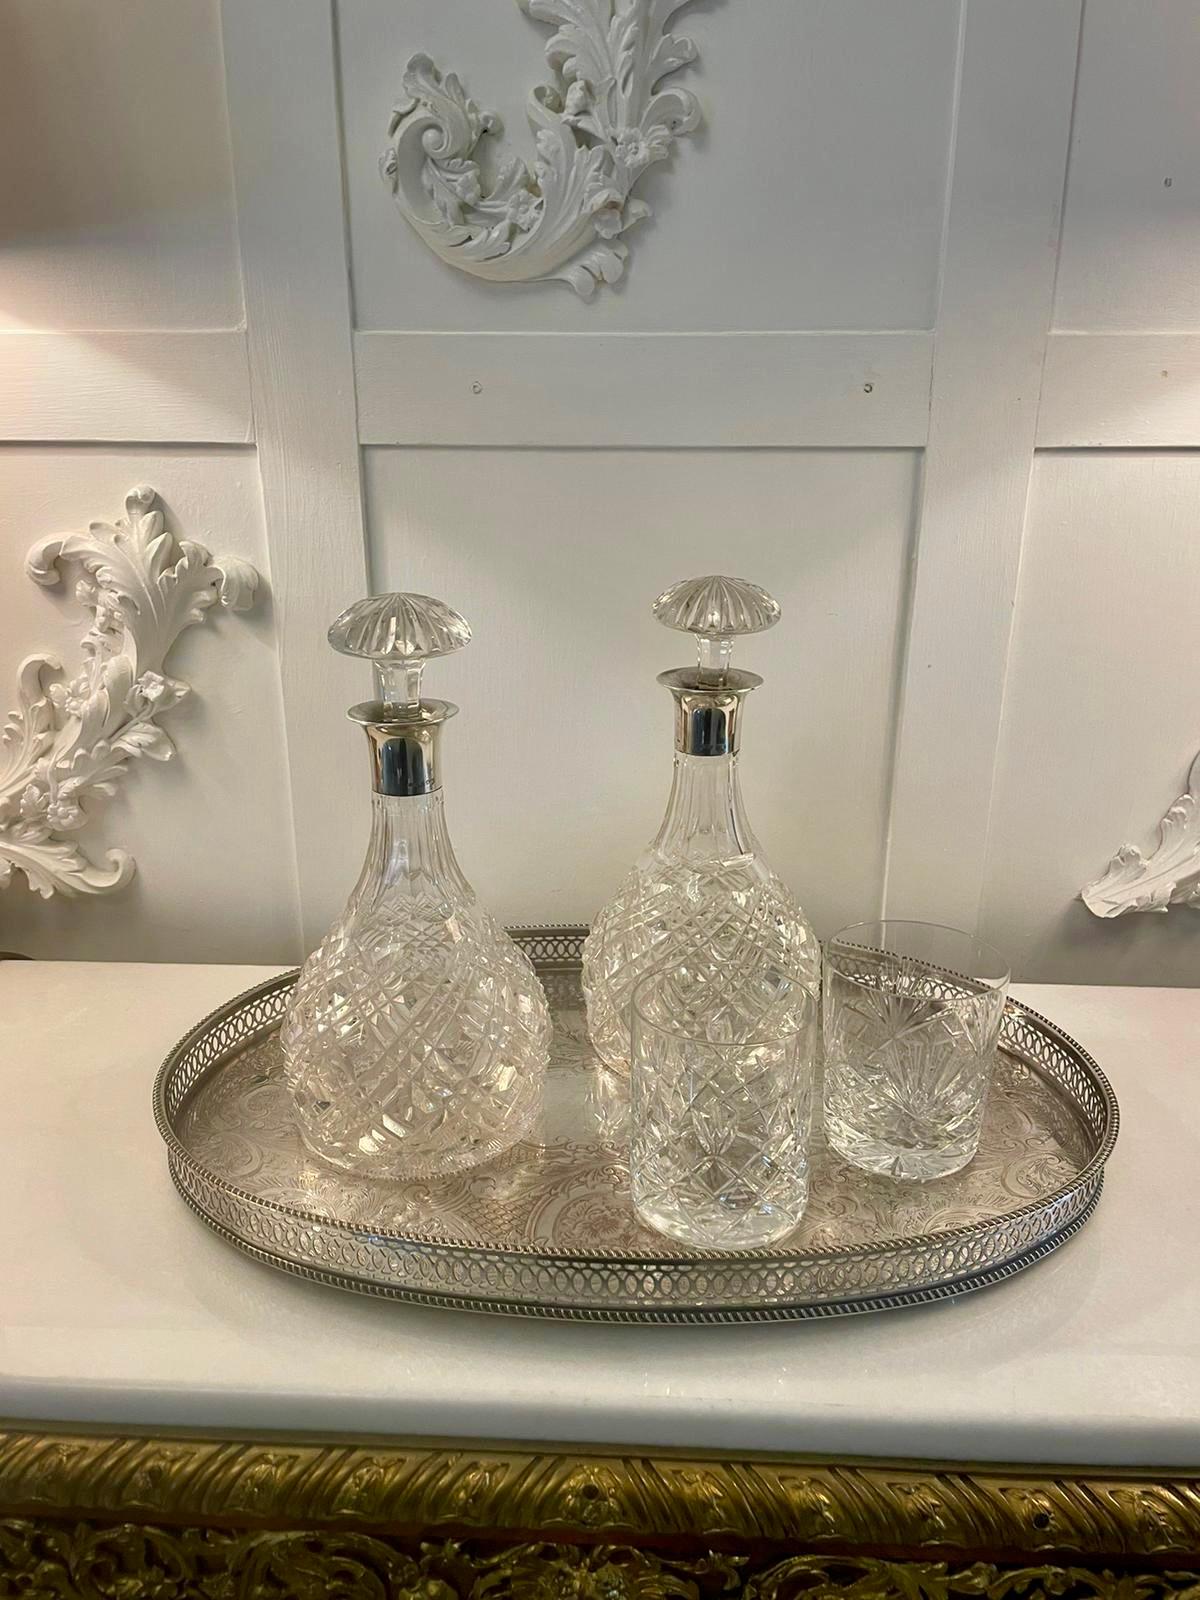 Superb quality pair of antique Edwardian cut glass decanters with silver mounts having the original cut glass stoppers, hallmarked solid silver mounts on a quality pair of shaped cut glass decanters


A charming decorative pair of first class